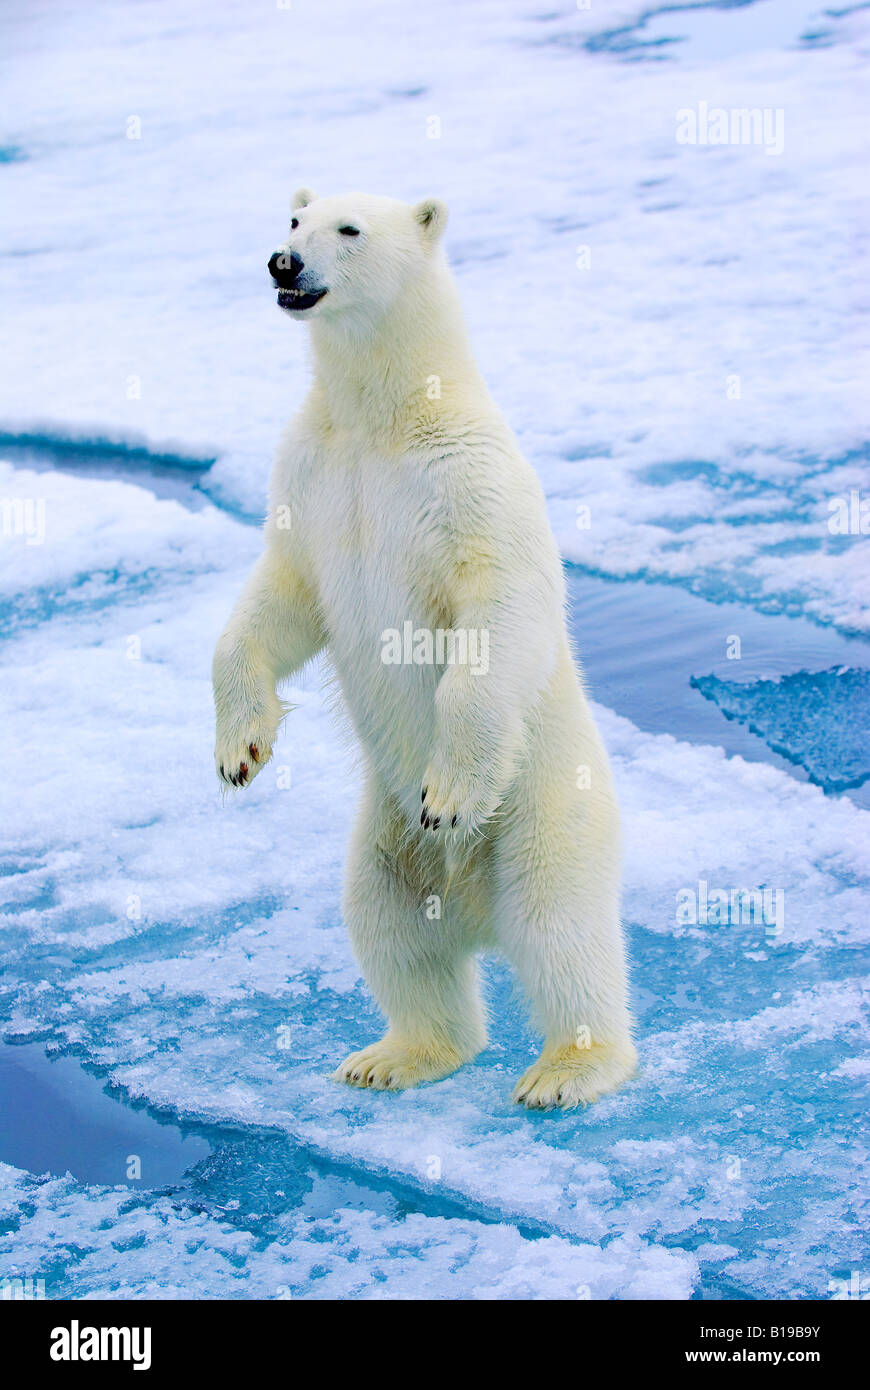 Polar bear (Ursus maritimus) searching for another bear on the pack ice, Svalbard Archipelago, Arctic Norway Stock Photo